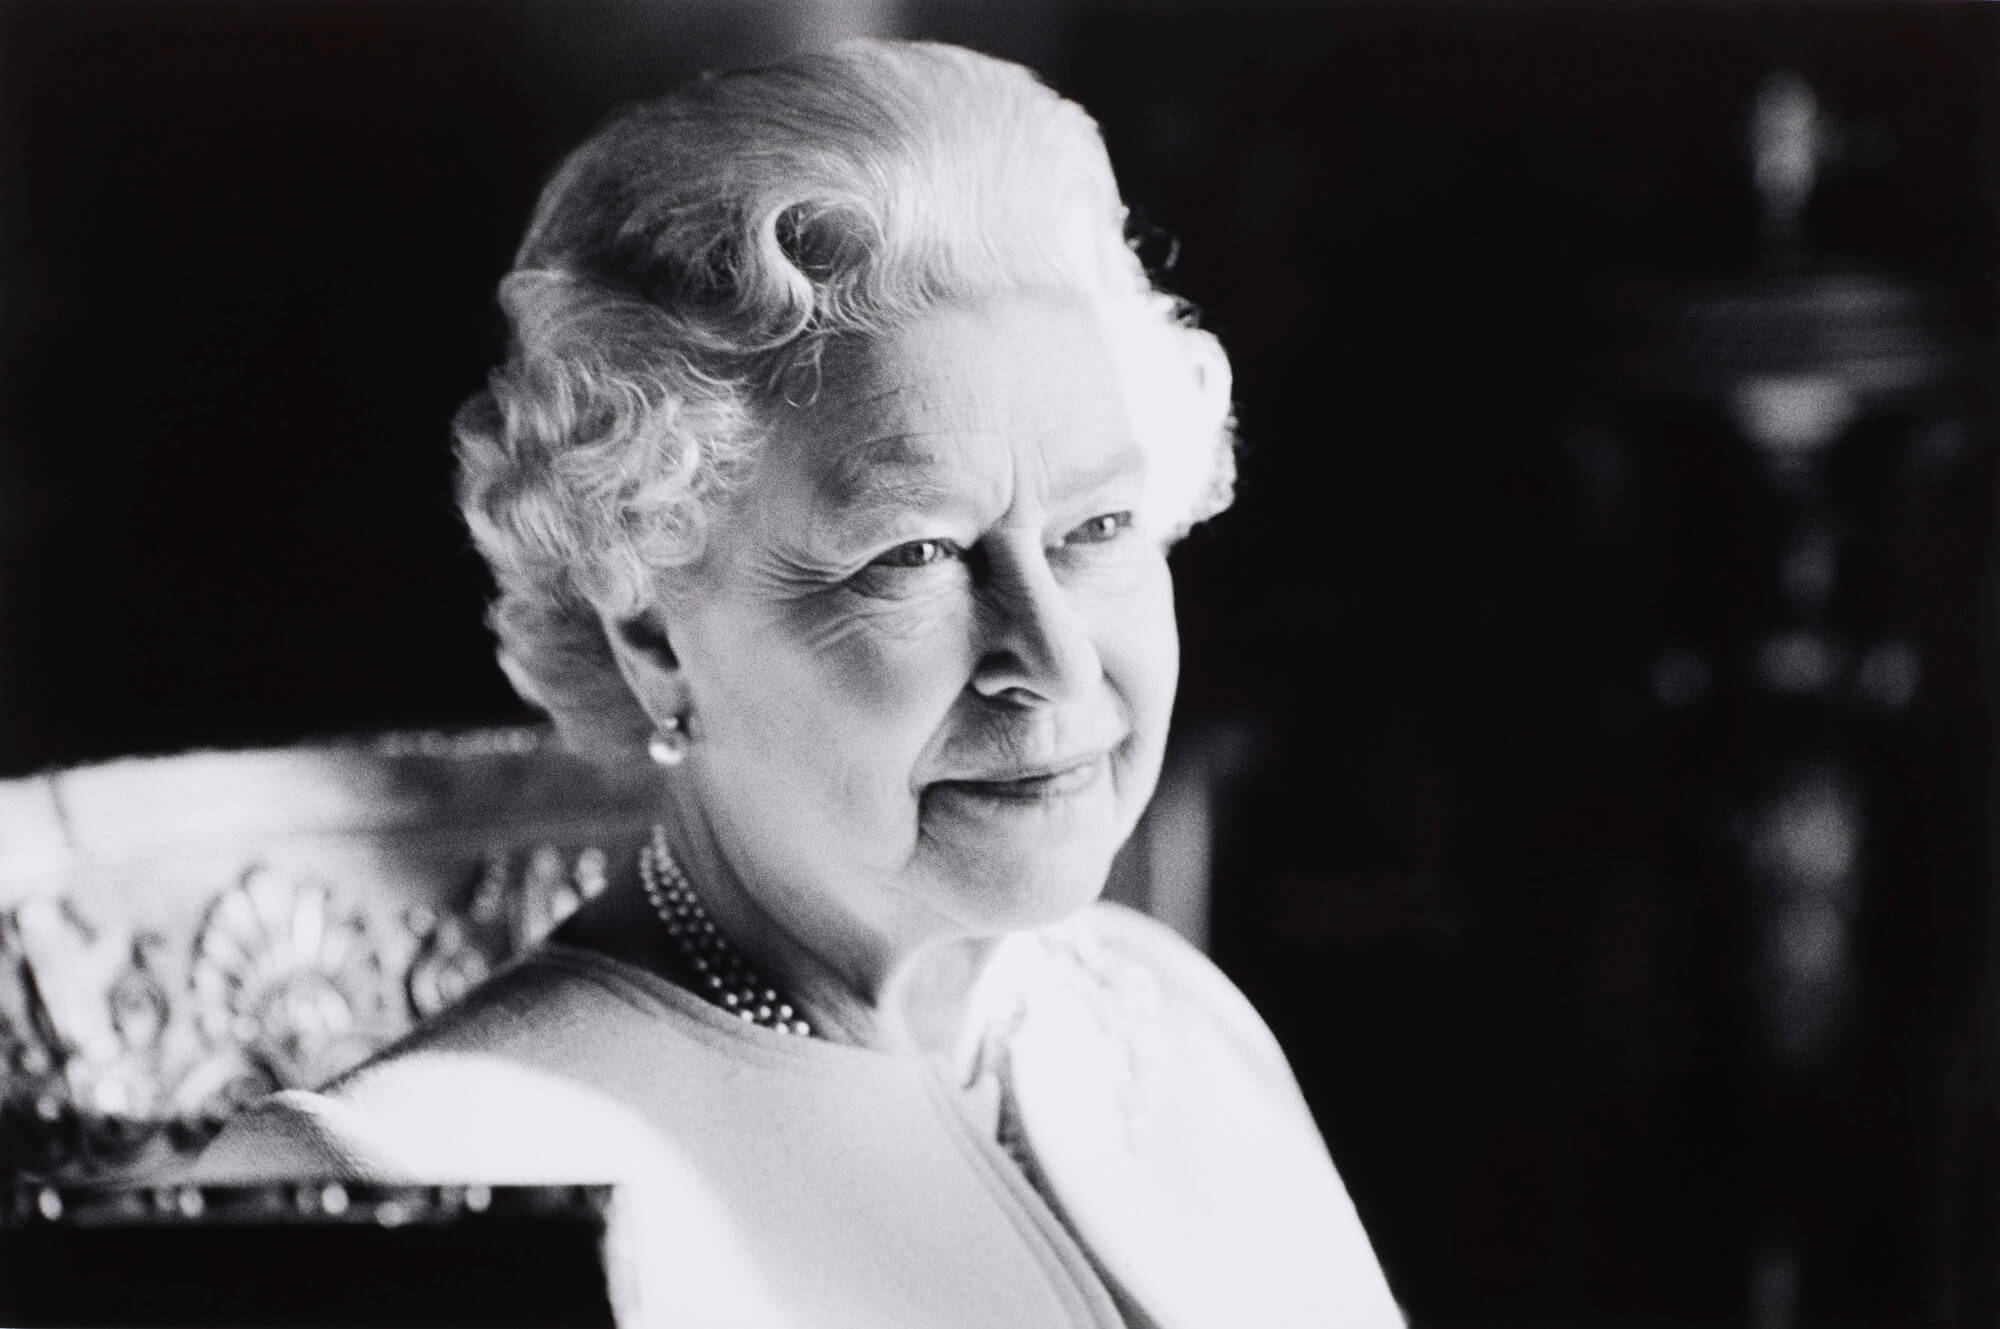 Black and white photo of Her Majesty The Queen, Elizabeth II